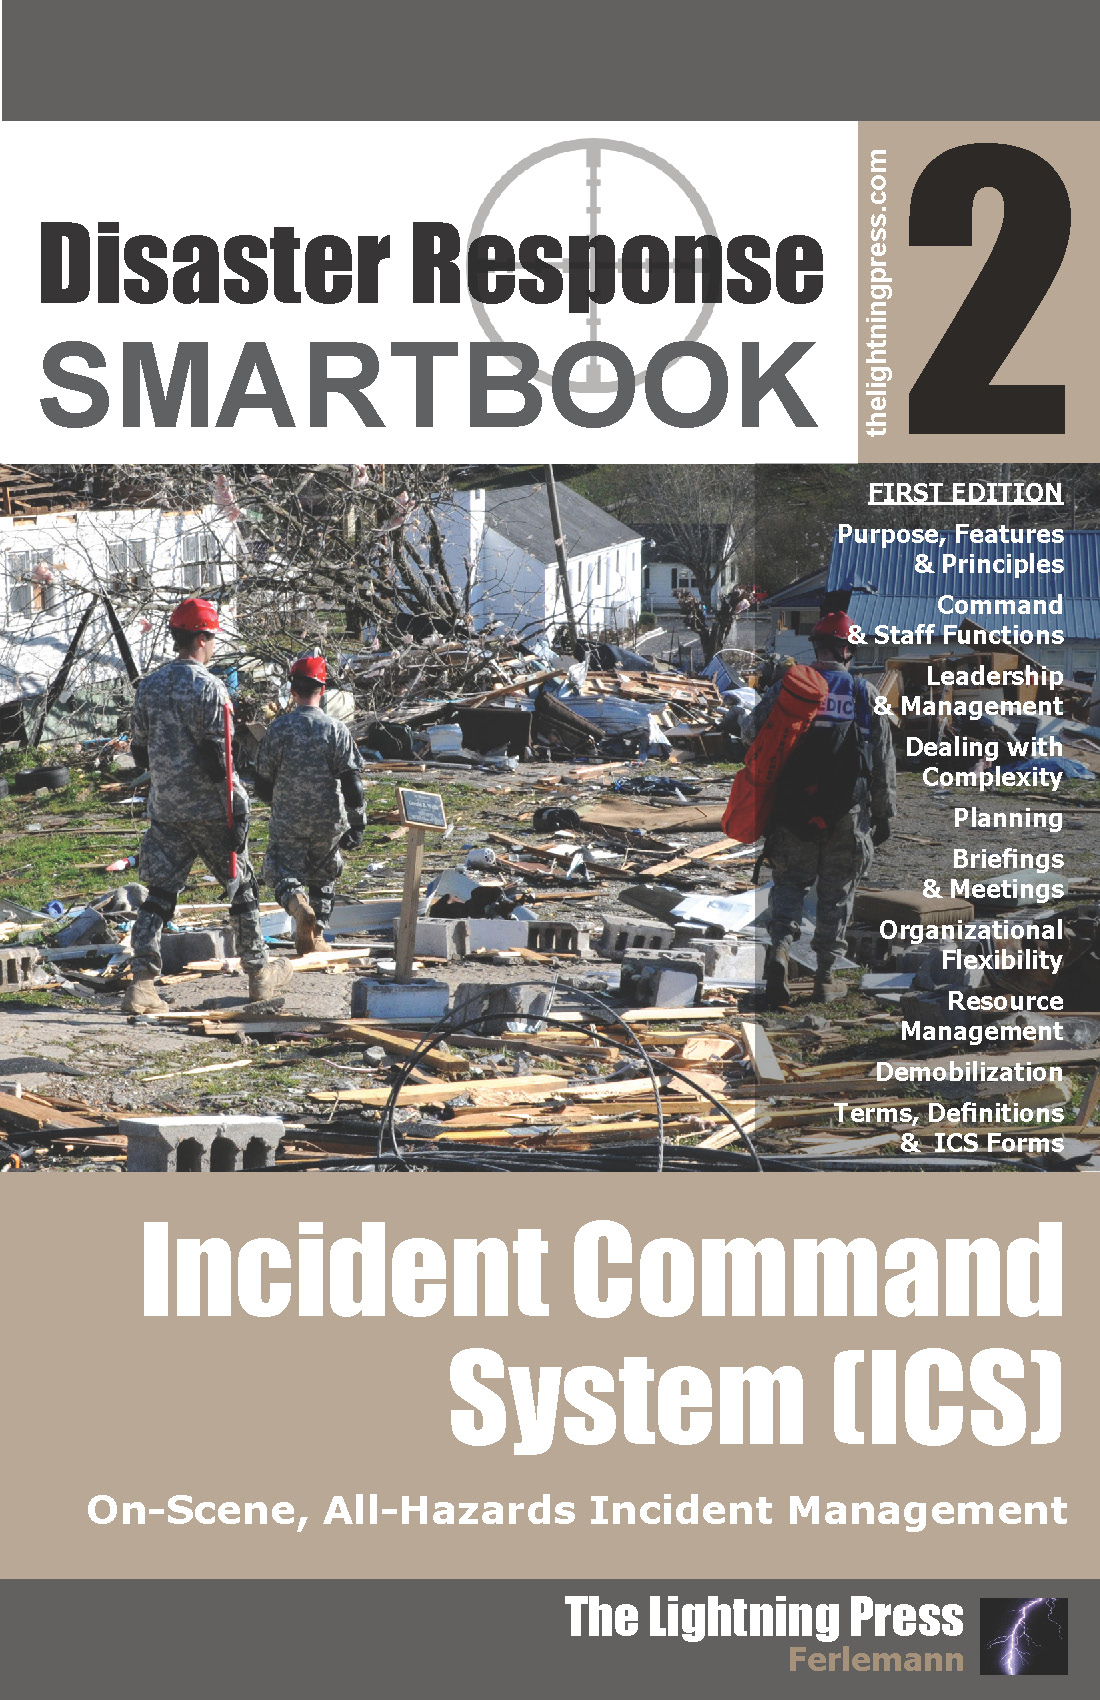 Disaster Response SMARTbook 2 – Incident Command System (ICS)